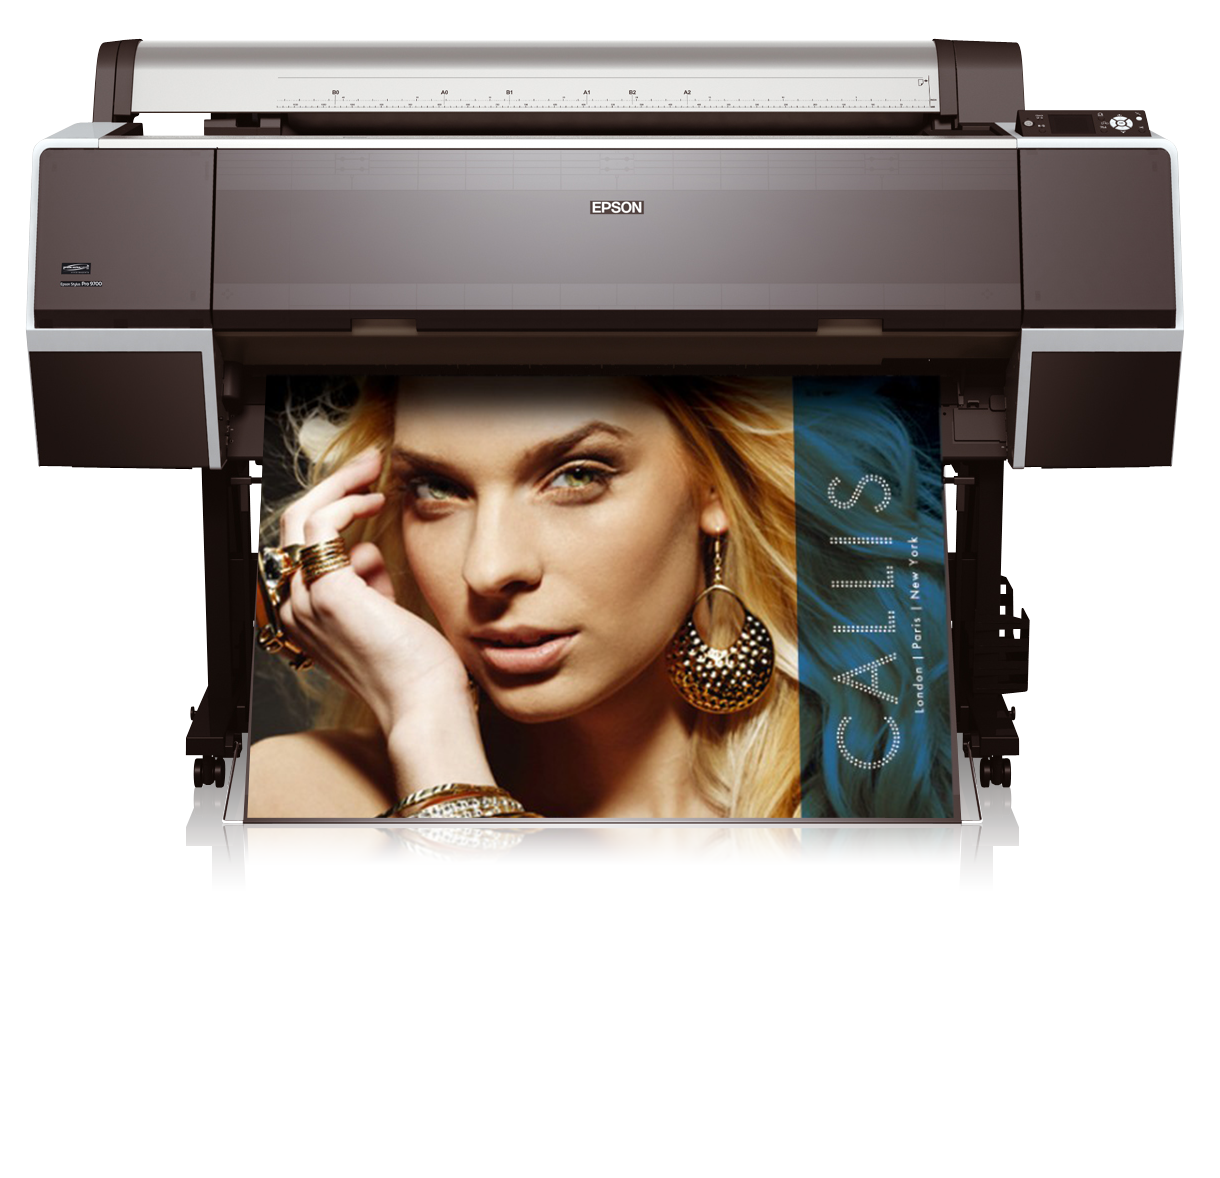 epson-stylus-pro-9700-lfp-printers-products-epson-southern-africa